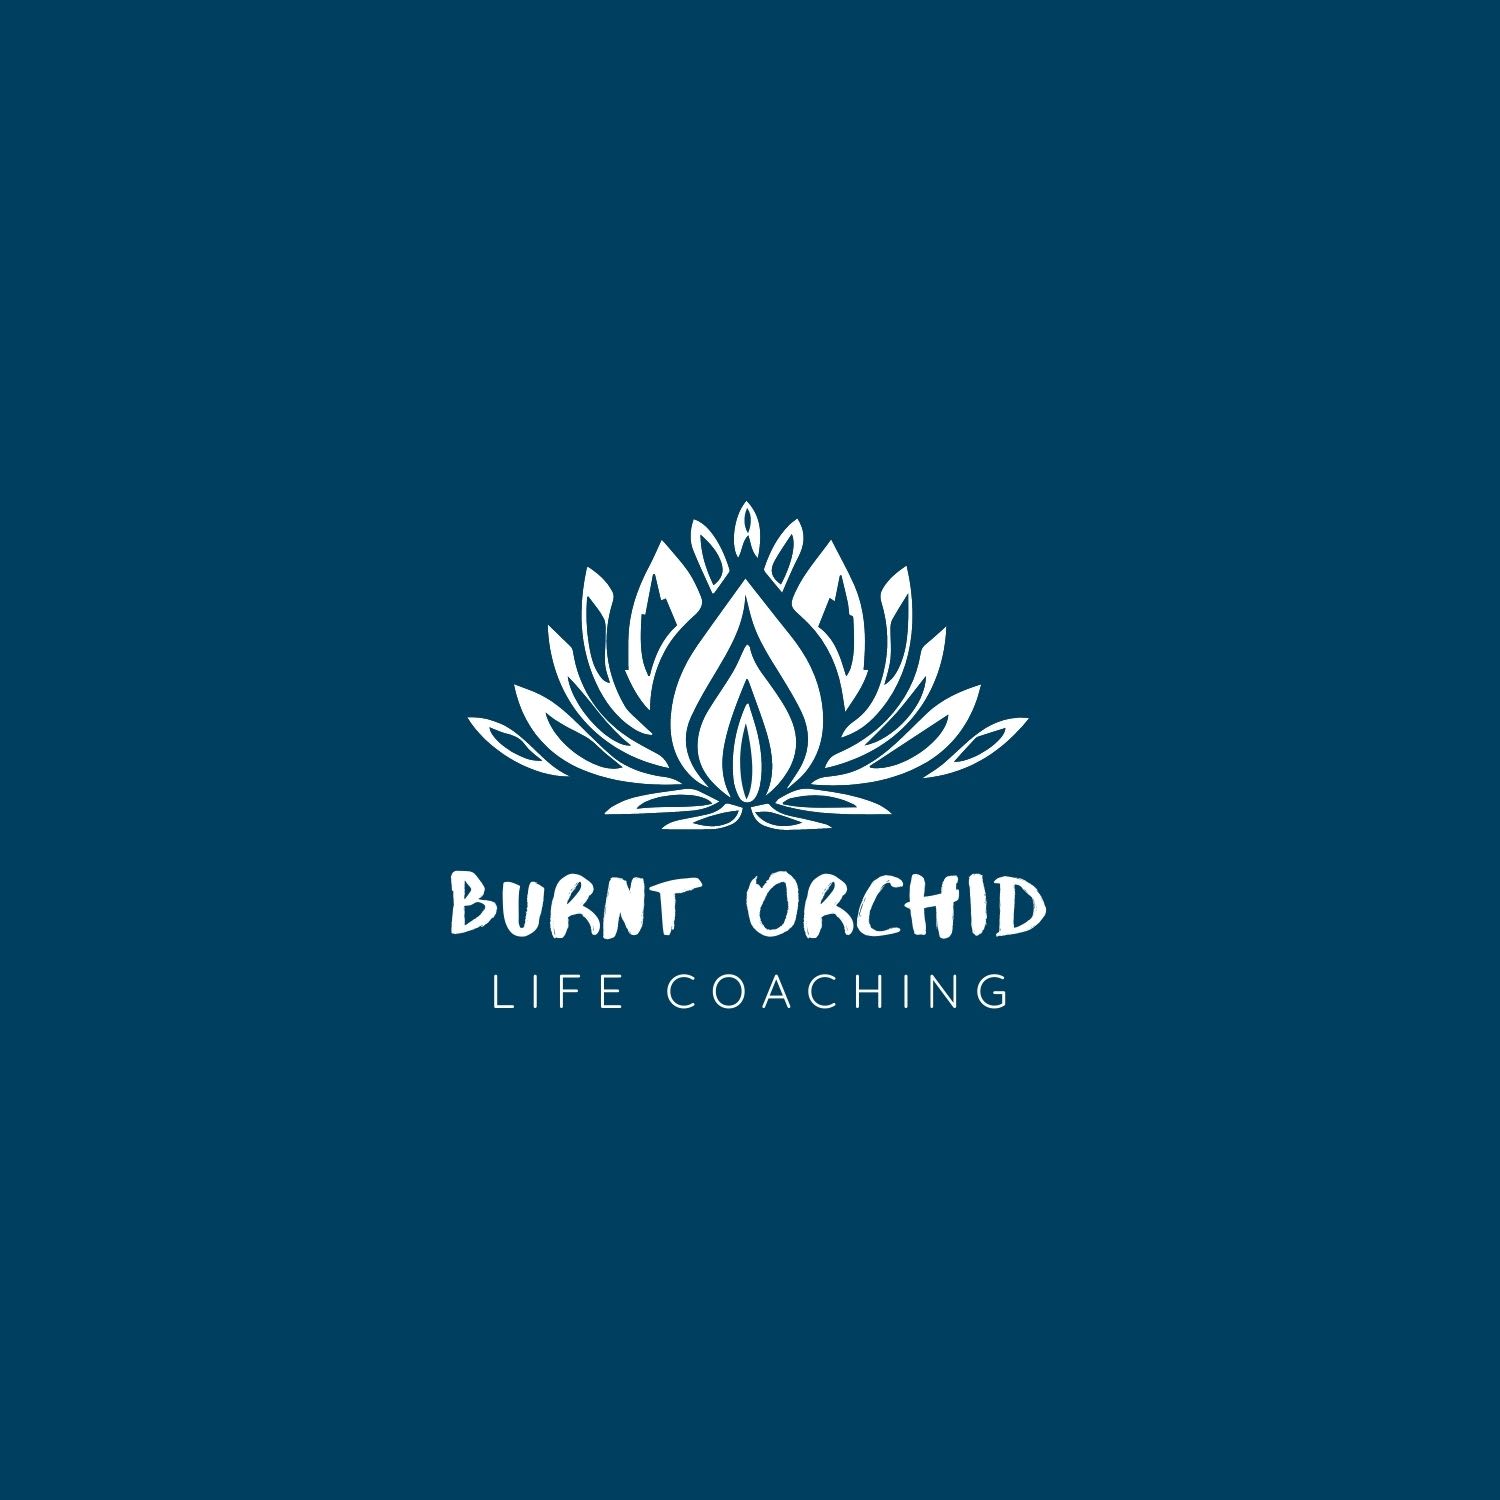 Burnt Orchid Life Coaching